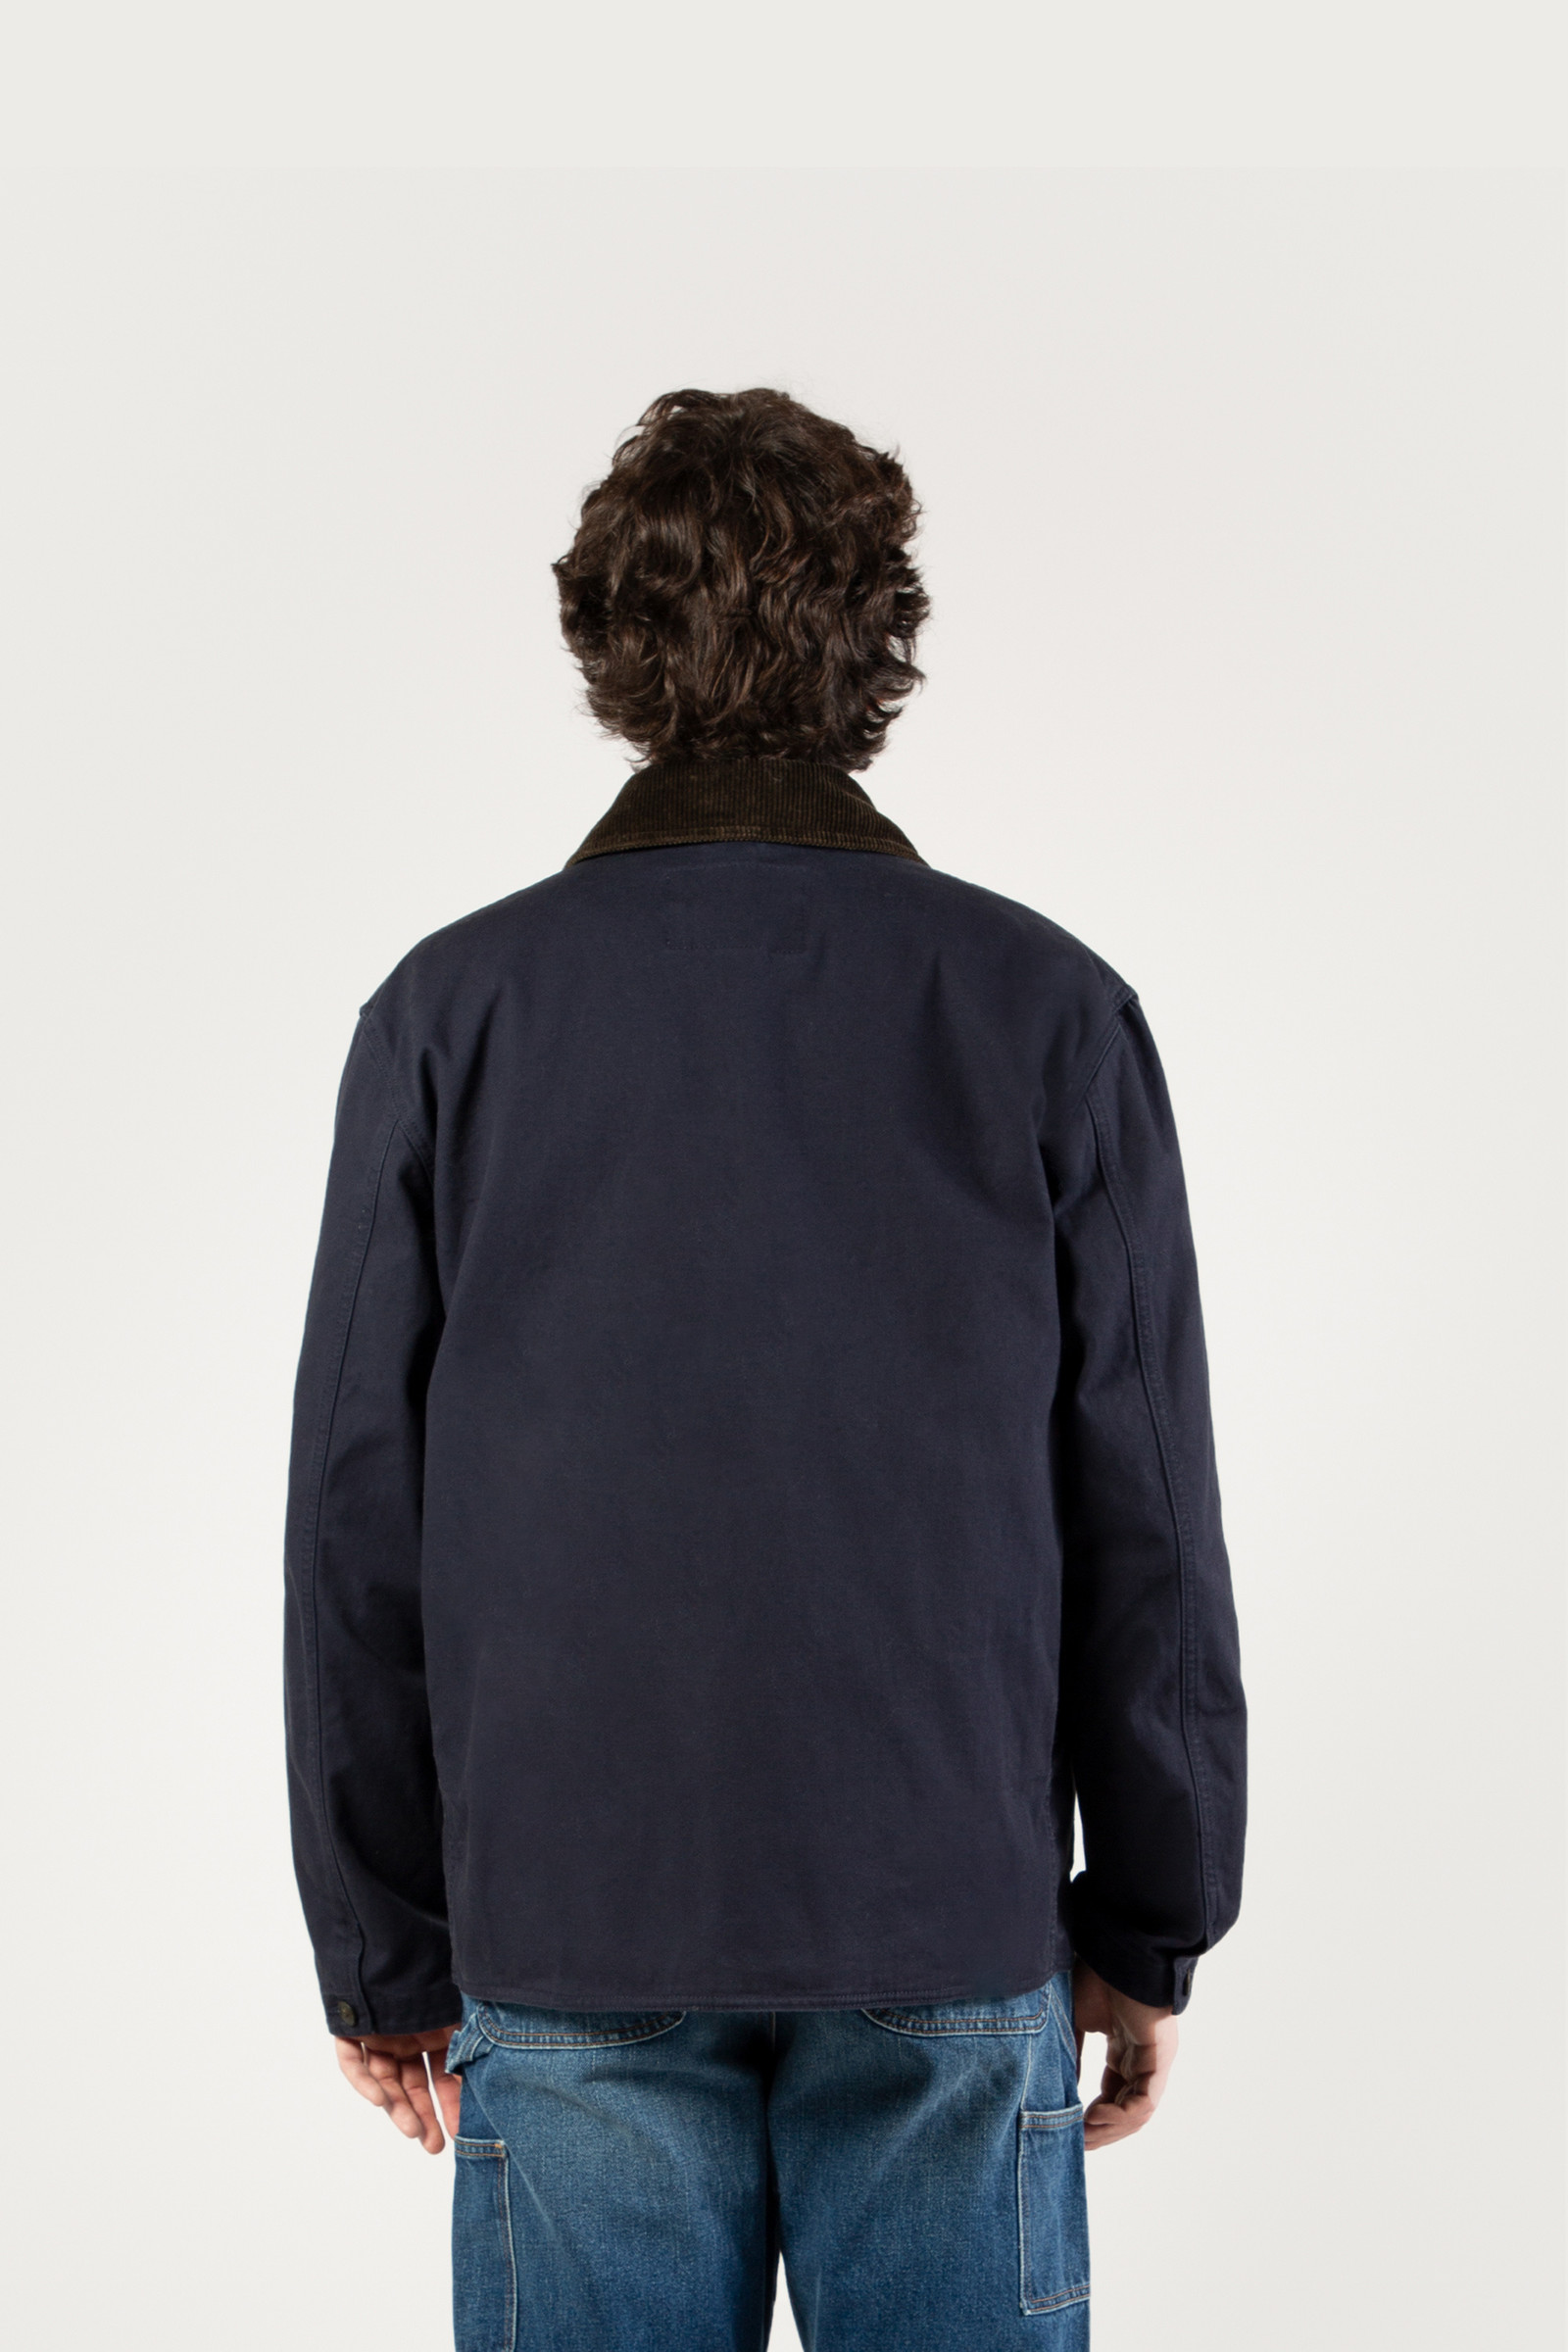 Men's 3-in-1 Jacket in Pure Cotton - One Of These Days / Woolrich Blue ...